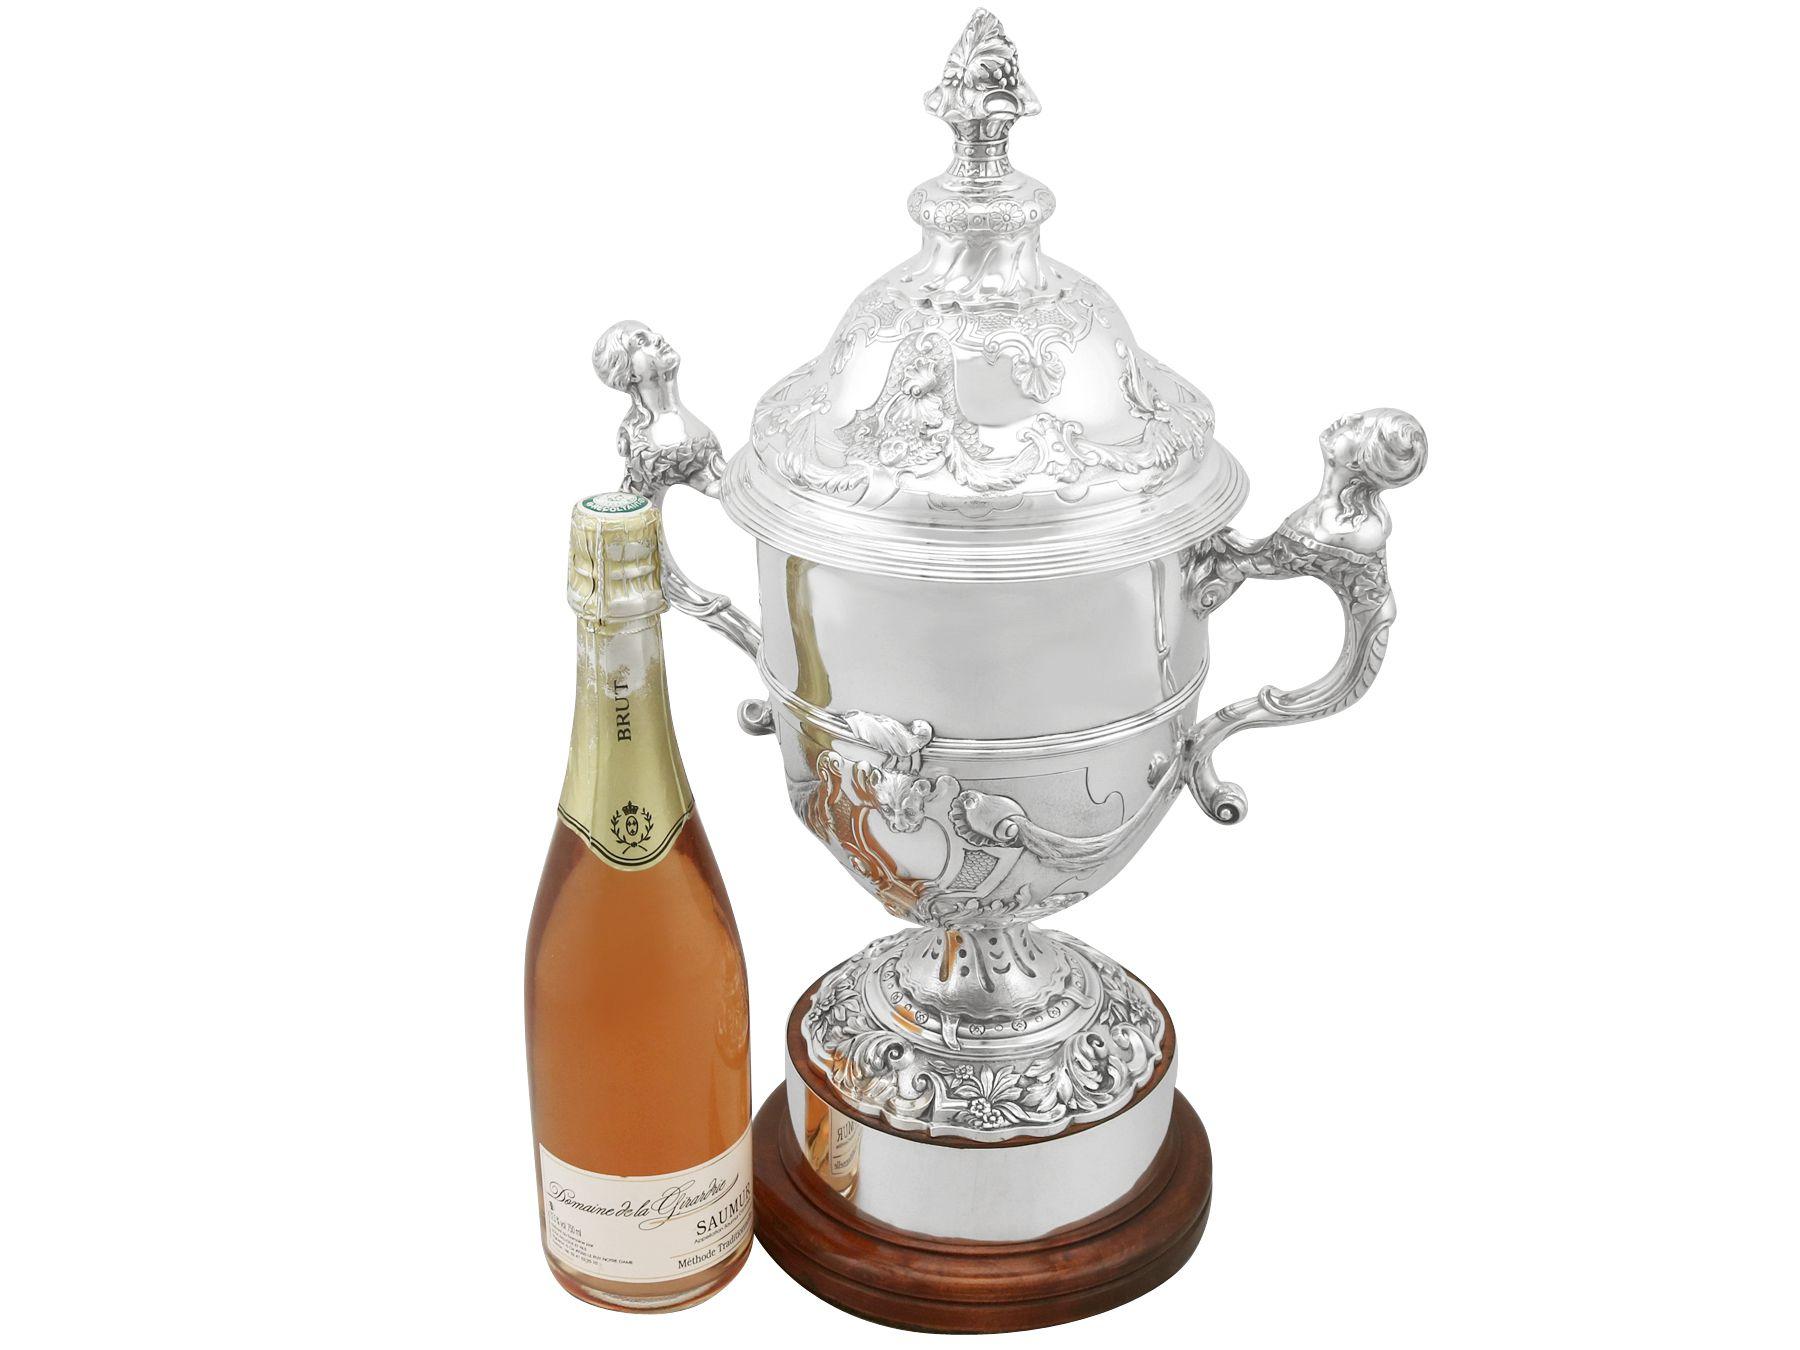 A magnificent, fine and impressive, large antique George V English sterling silver presentation cup and cover made in a Paul de Lamerie design; an addition to our presentation silverware collection

This magnificent antique George V sterling